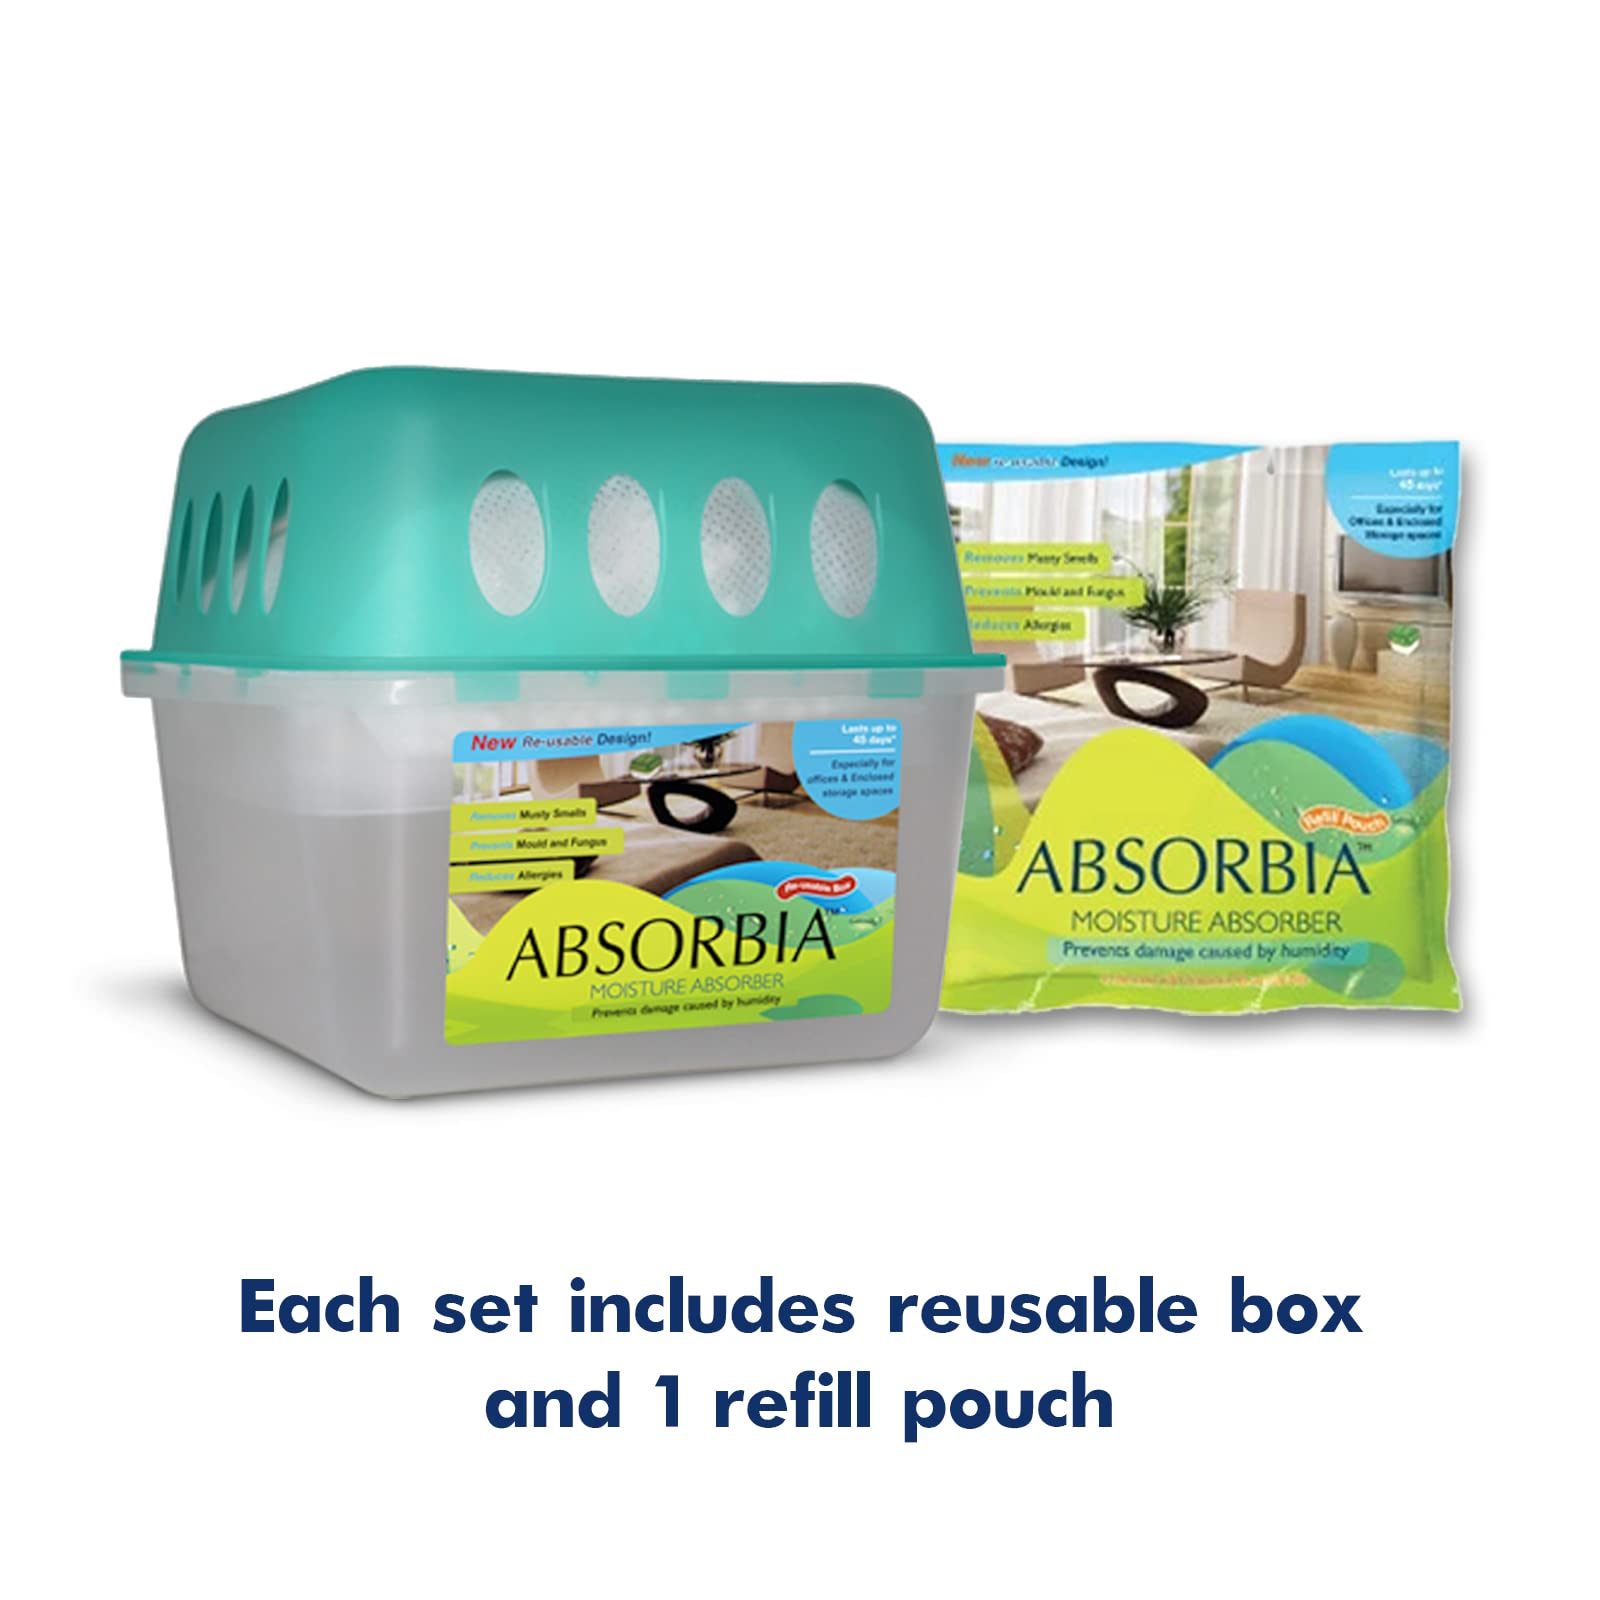 Absorbia Moisture Absorber Hanging Pouch - Pack of 3(440g each)| Absorbia Reusable Box with Refill - Pack of 3(400g each) | Dehumidifier for Wardrobe, Cupboards & Closets